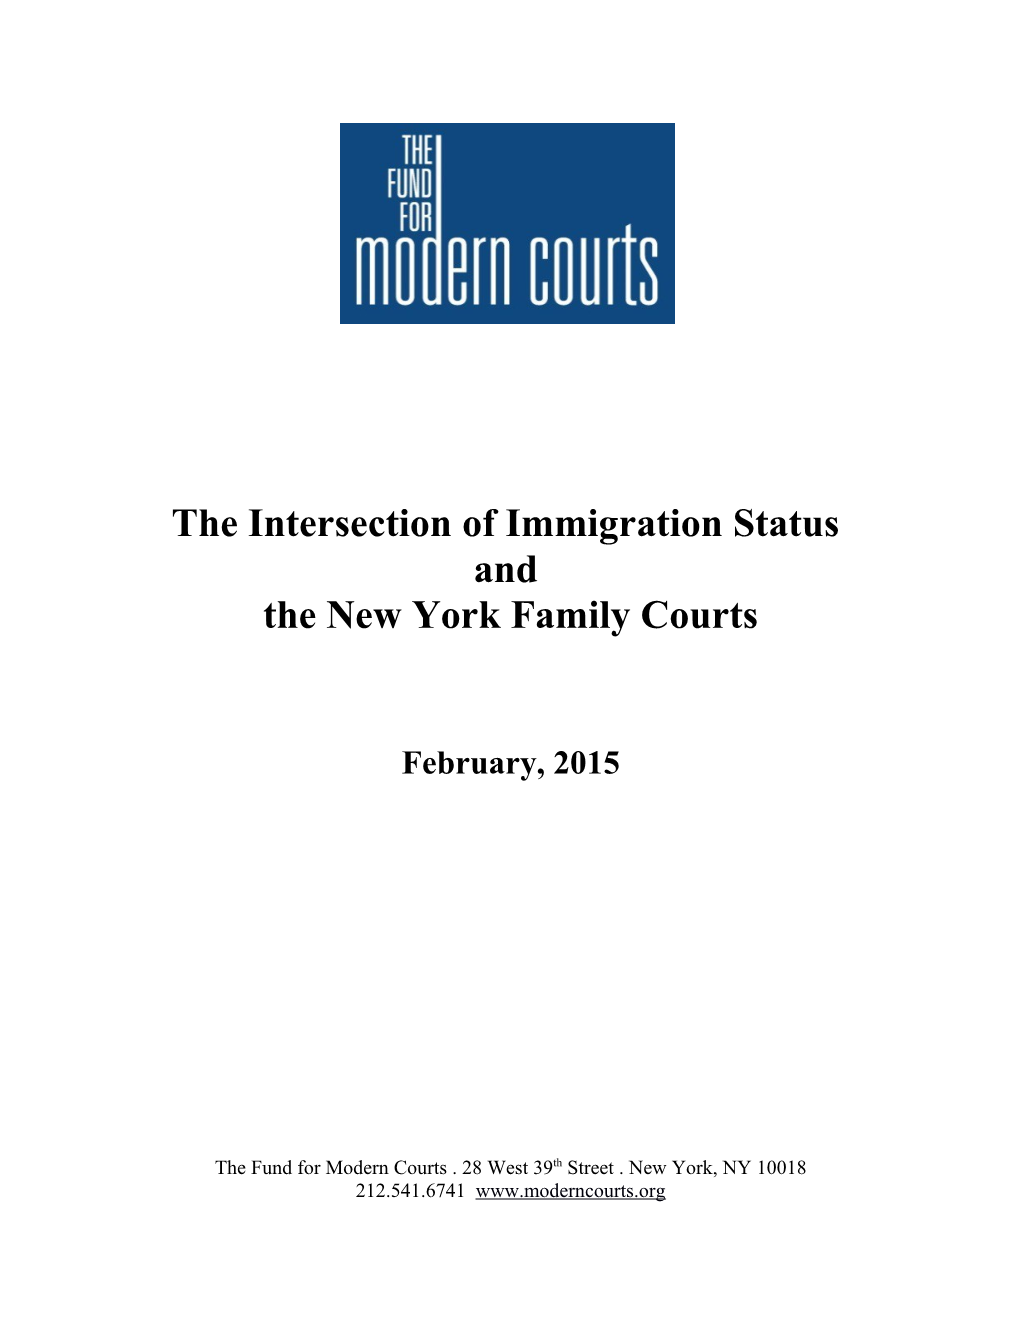 The Intersection of Immigration Status and the New York Family Courts